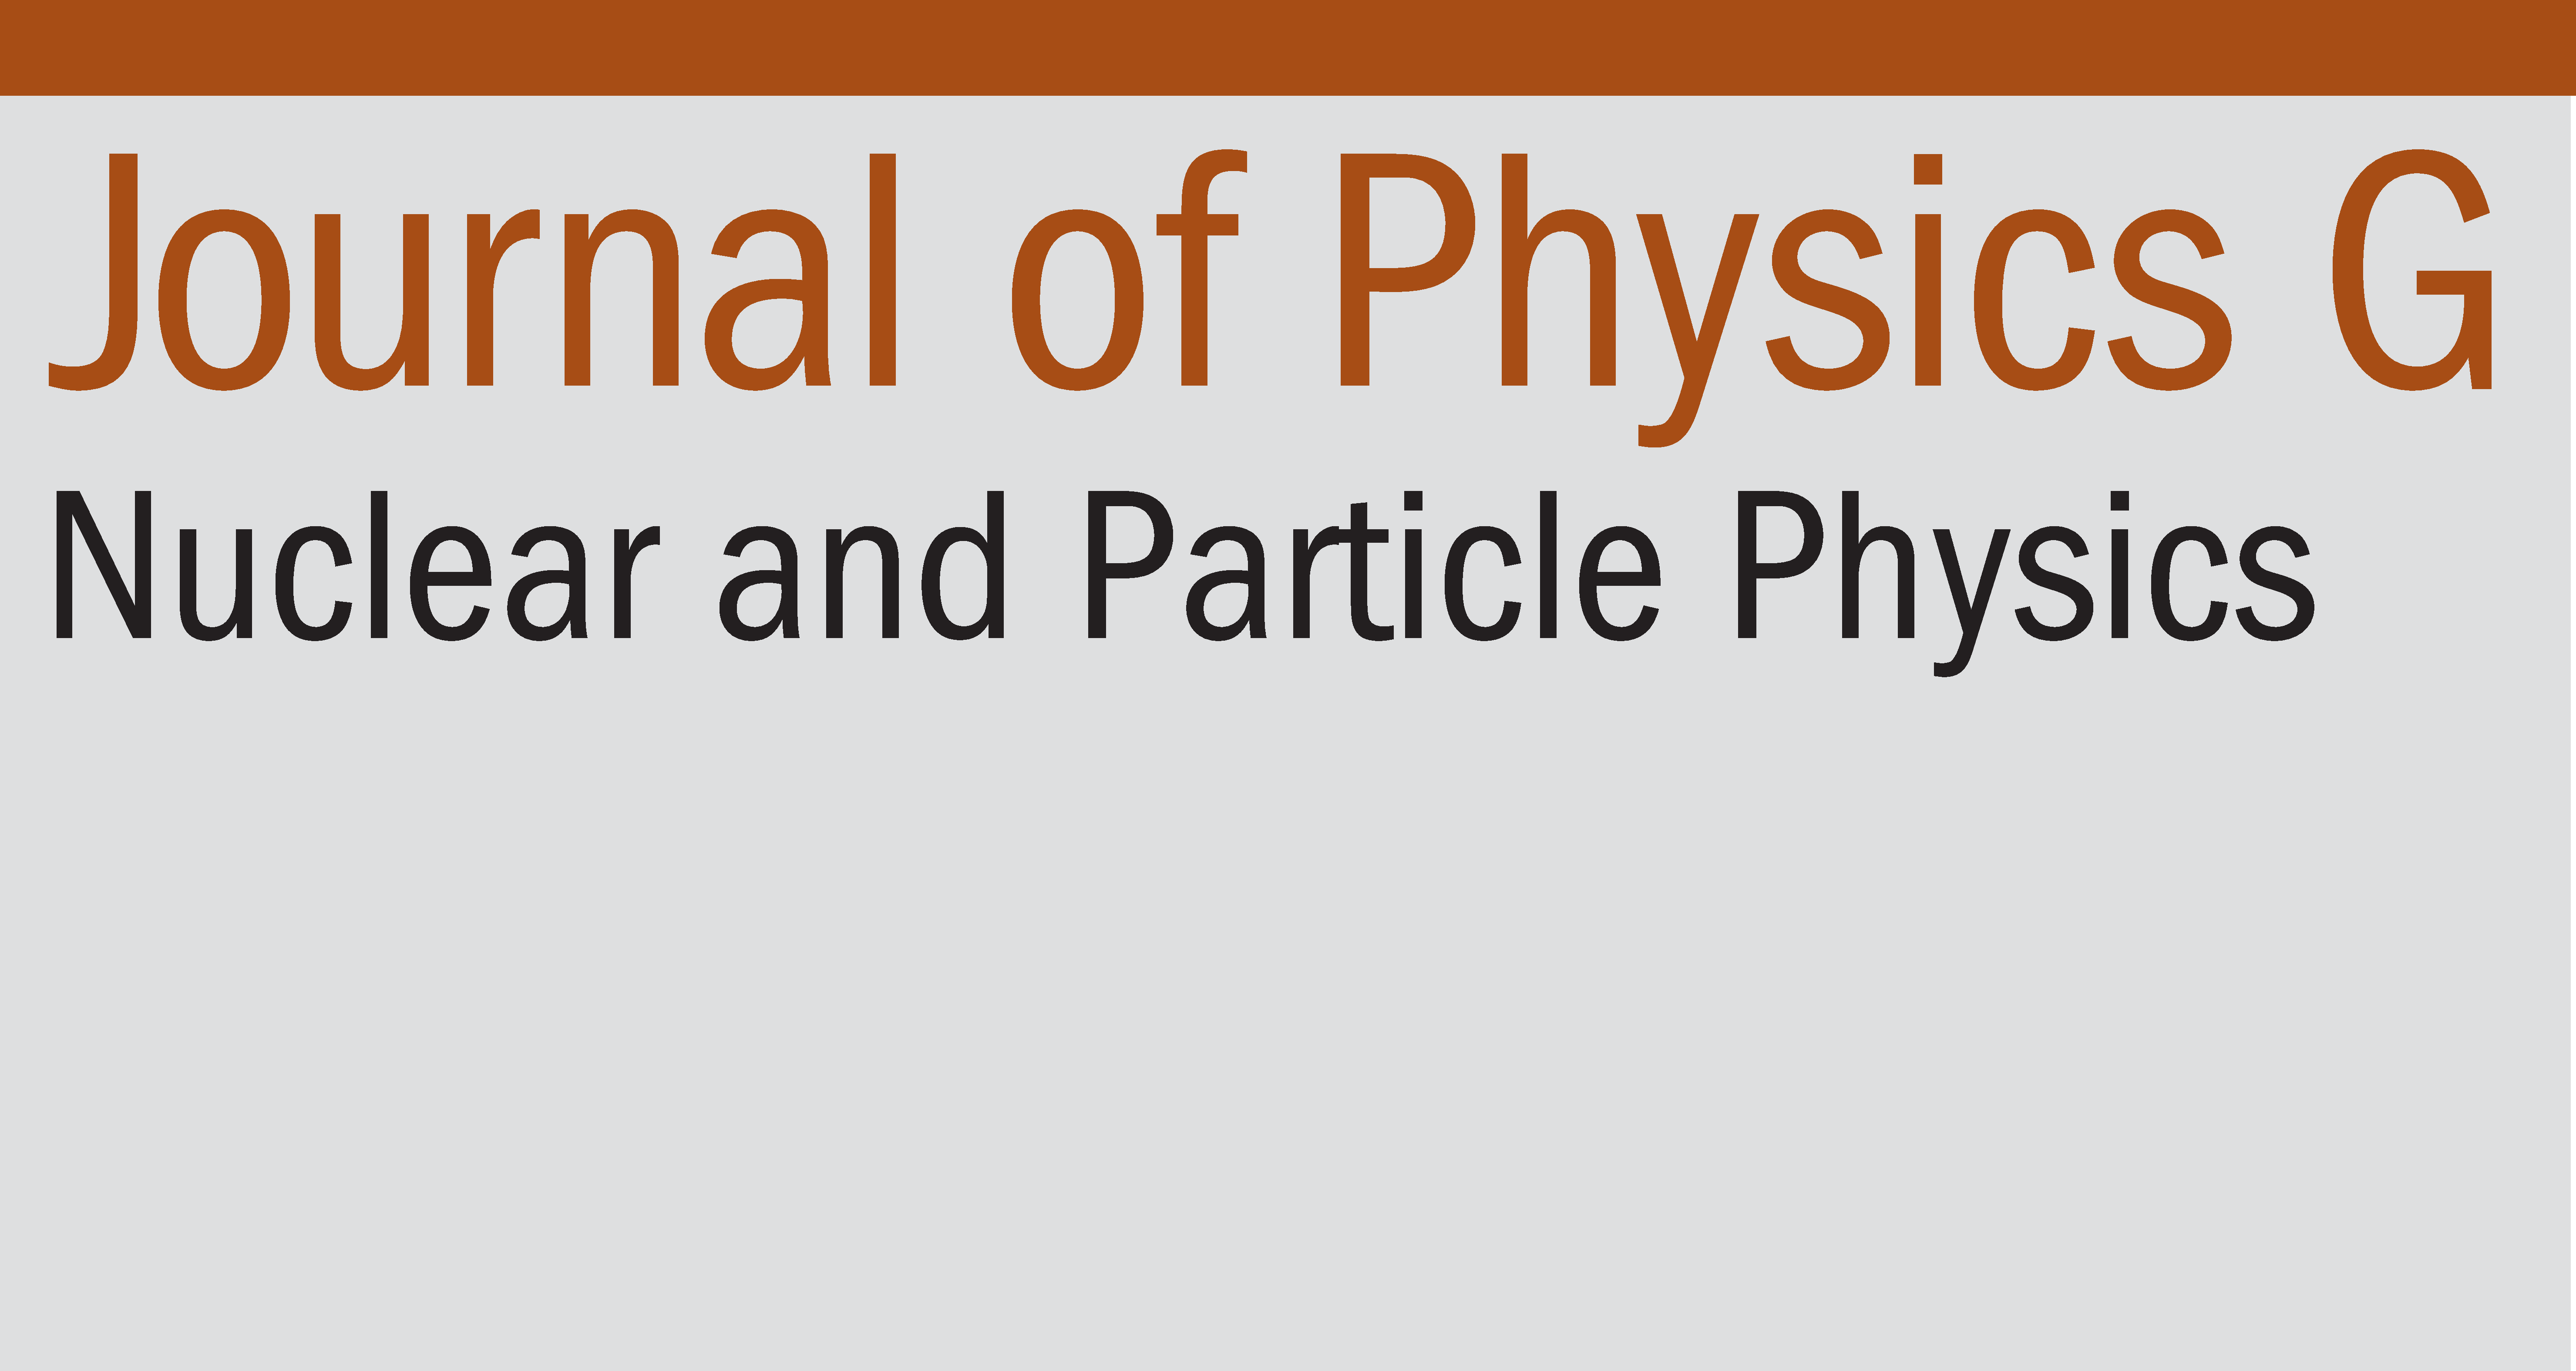 IOP Science - Journal of Physics G: Nuclear and Particle Physics